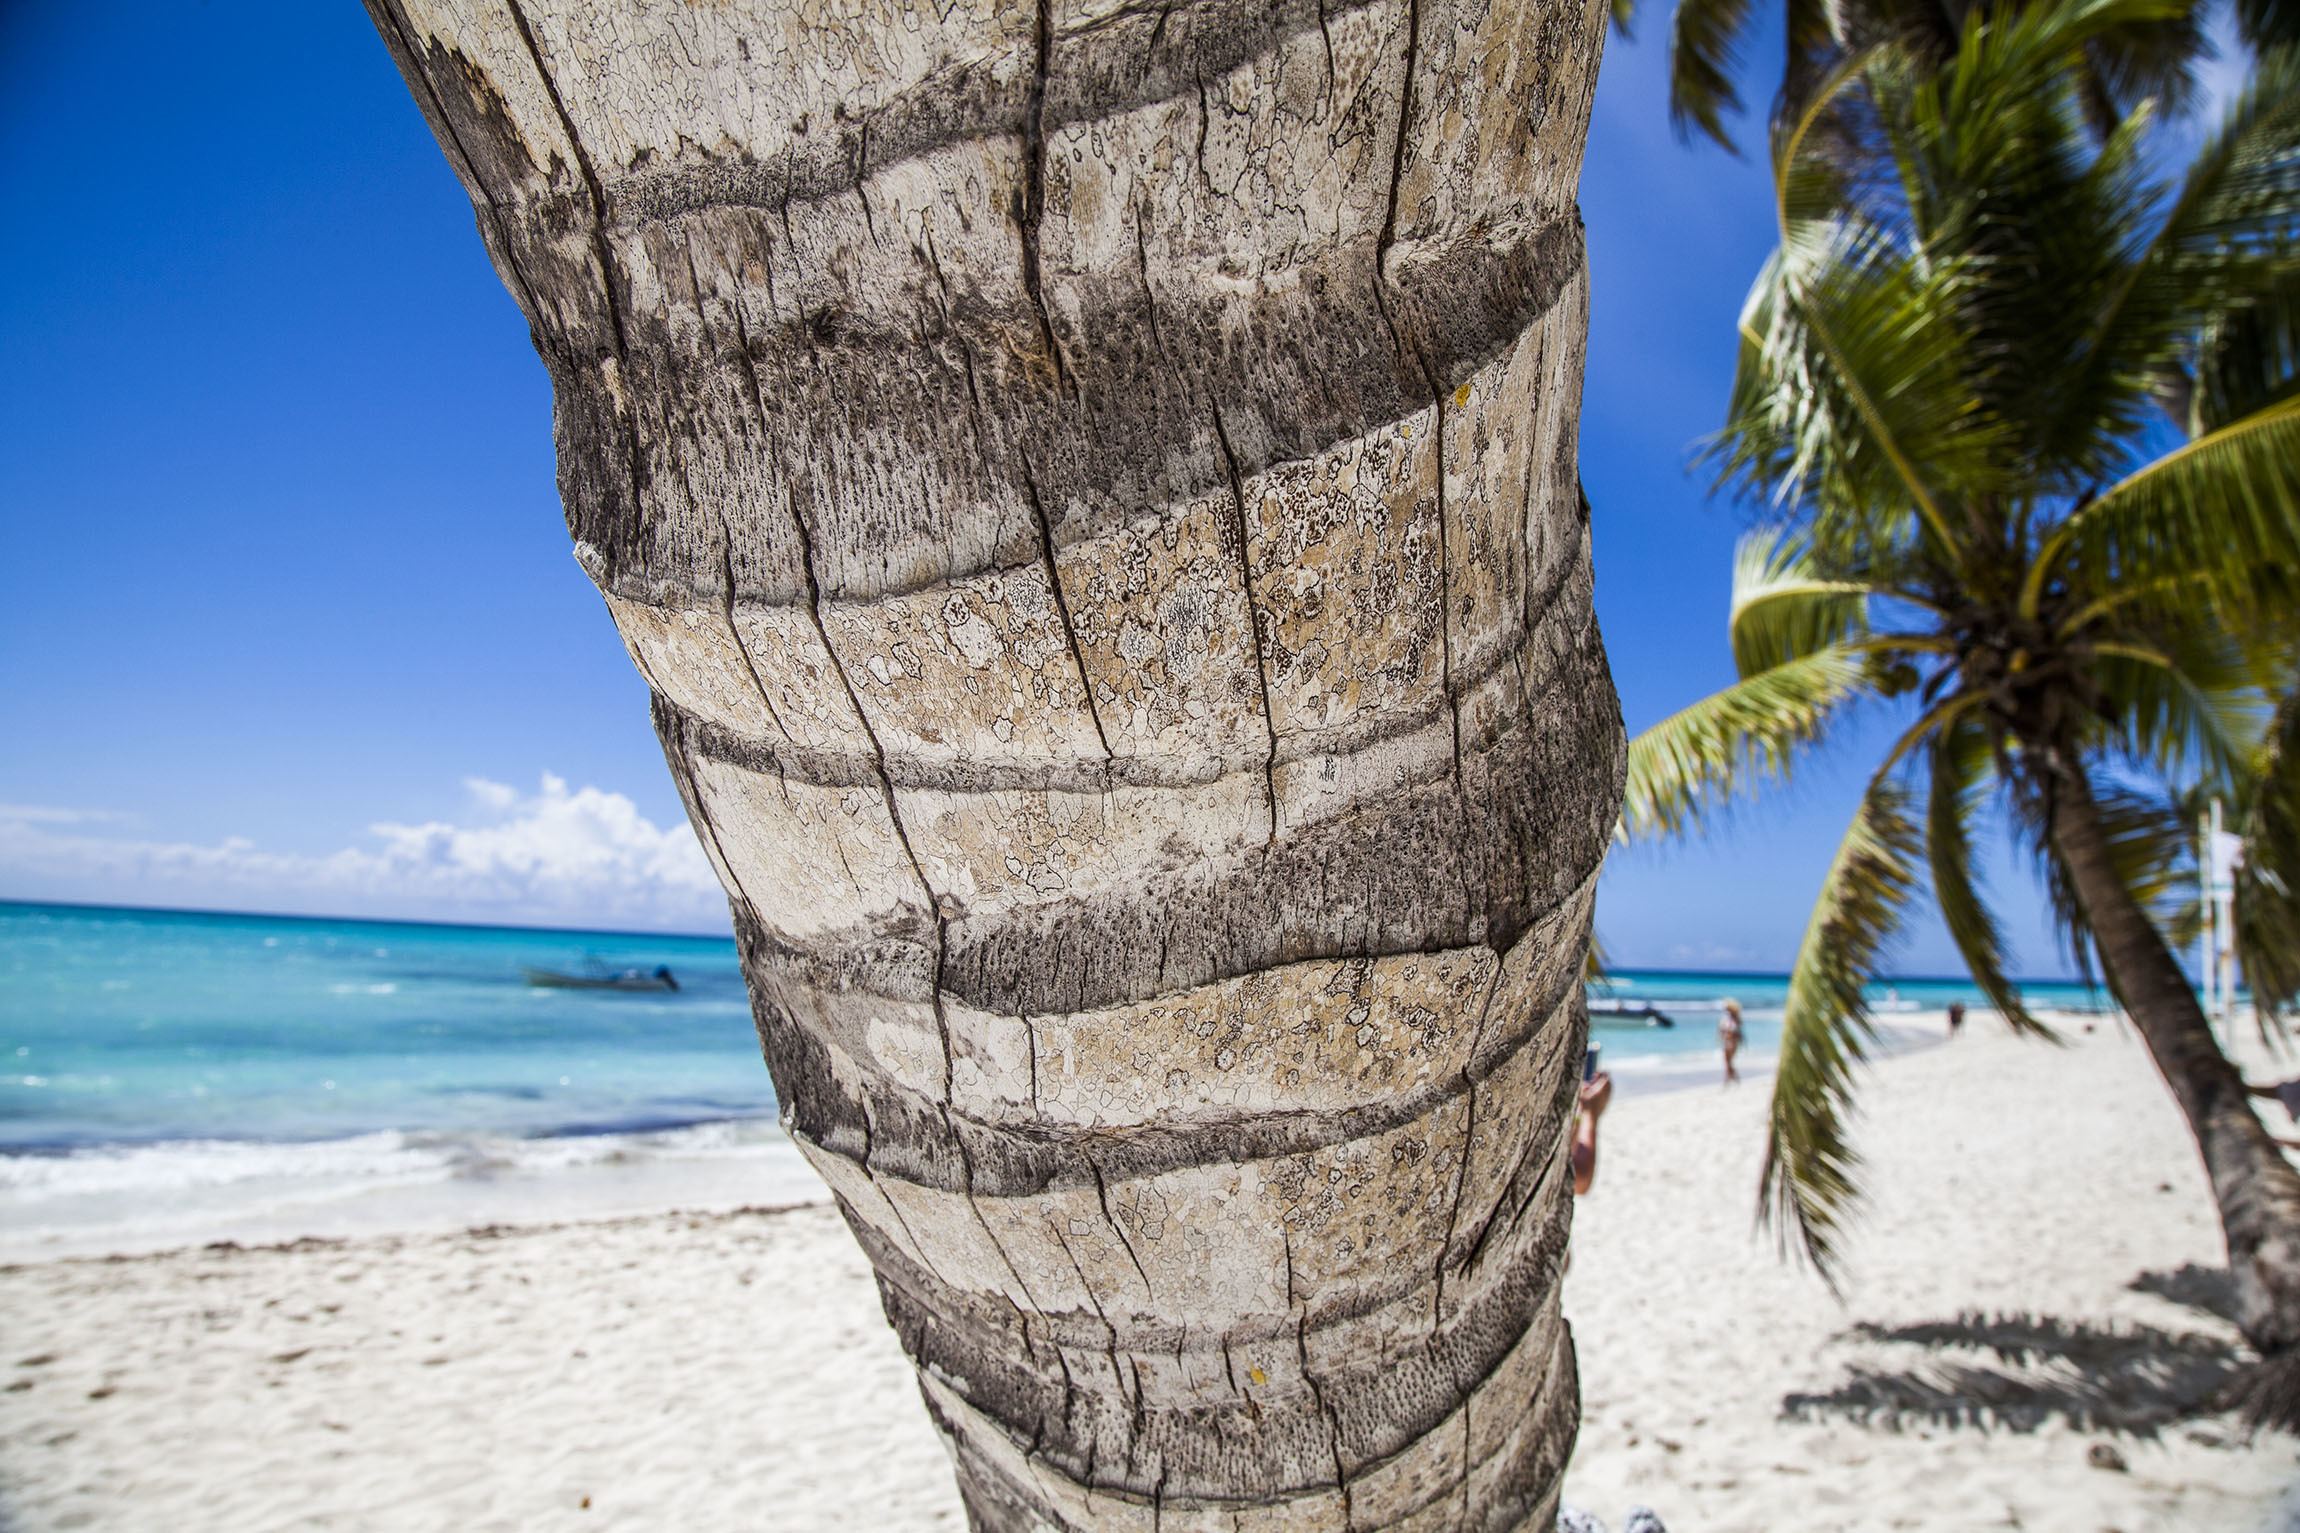 A leaning tree on the beach of Saona Dominican Republic